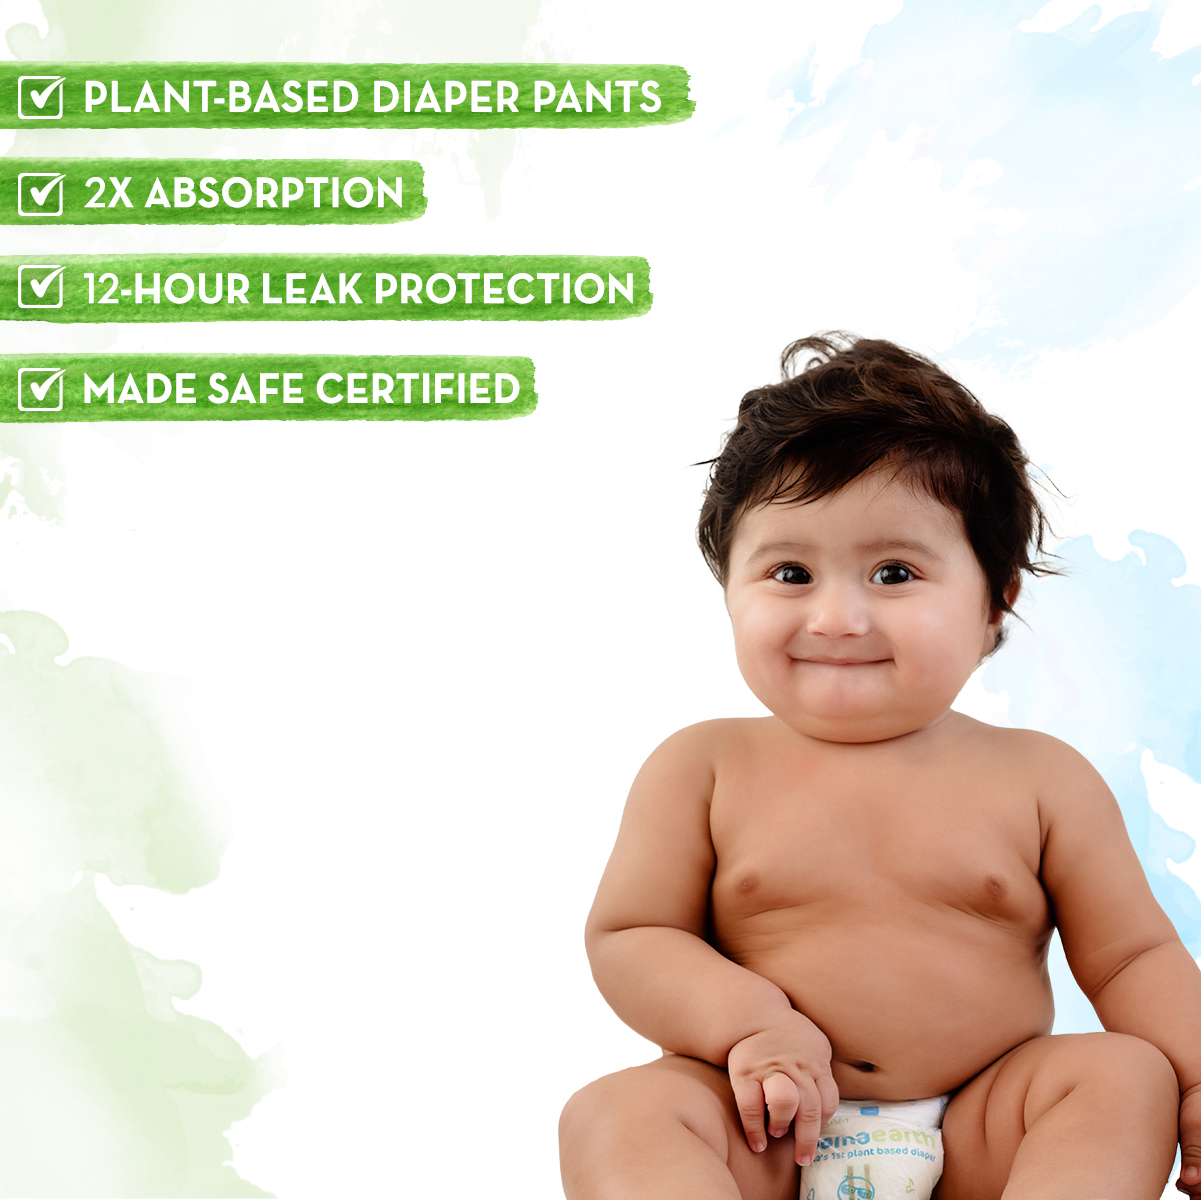 Pampers Premium Care Pants, Large size baby diapers (L), 88 Count, Softest  ever Pampers pants Online in India, Buy at Best Price from Firstcry.com -  2163907